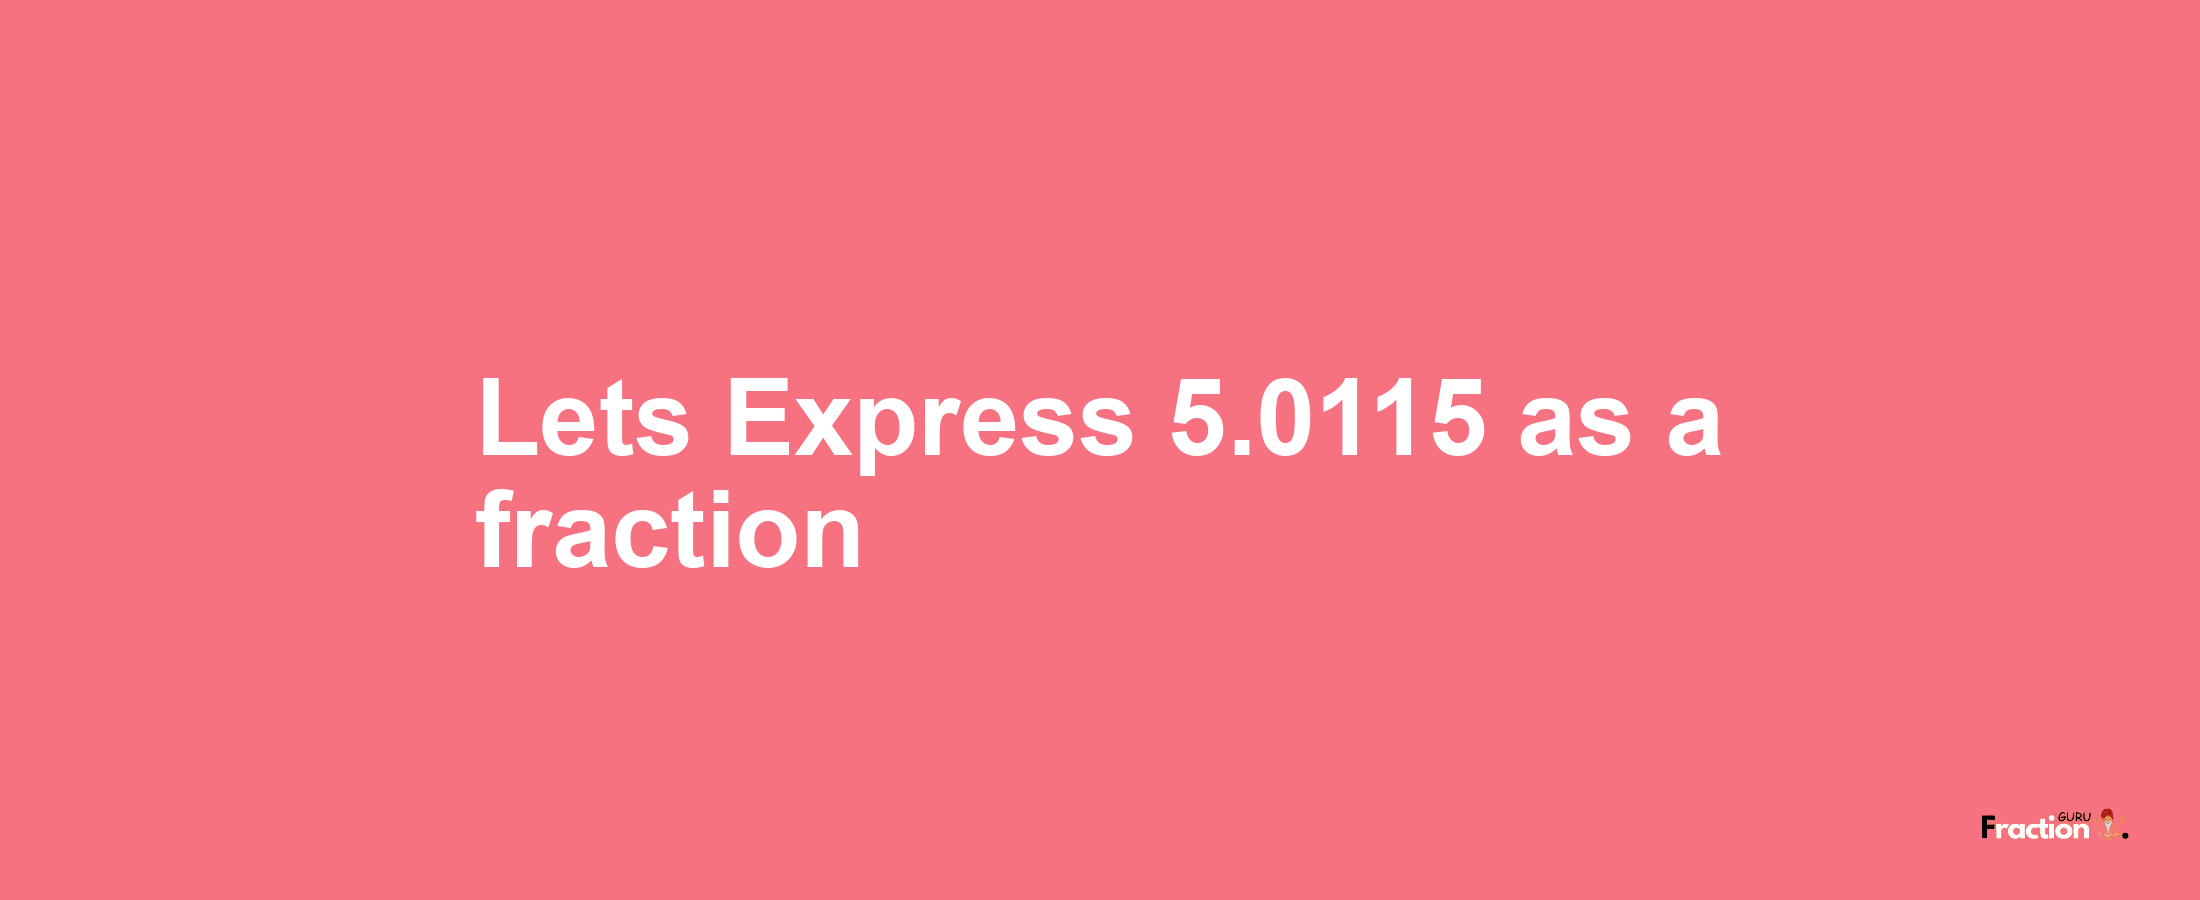 Lets Express 5.0115 as afraction